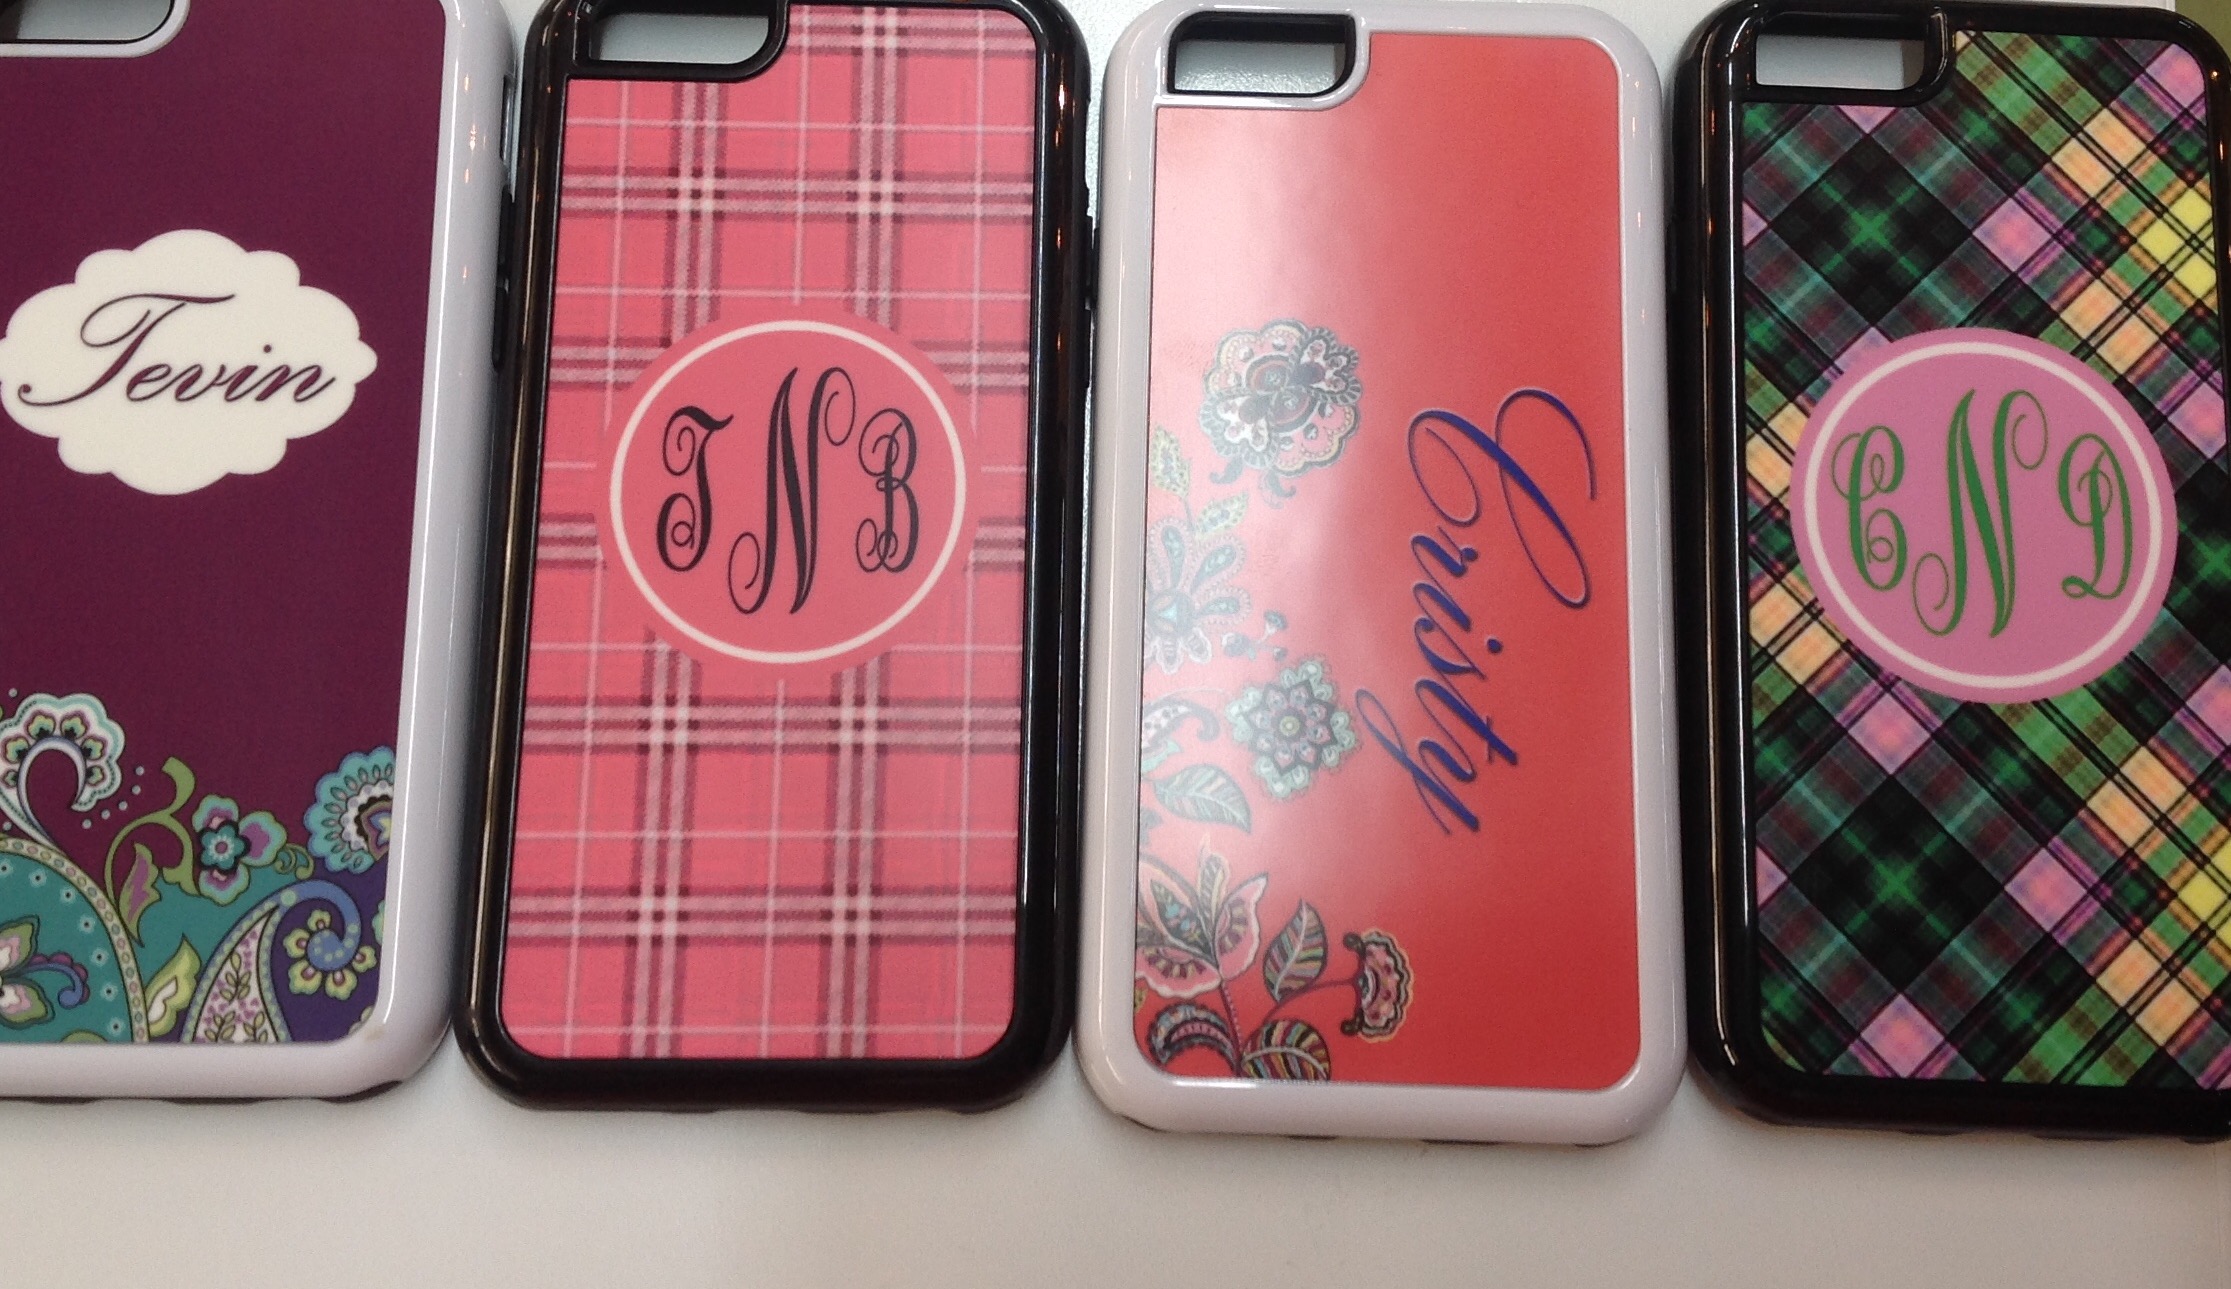 Phone Cases made with sublimation printing